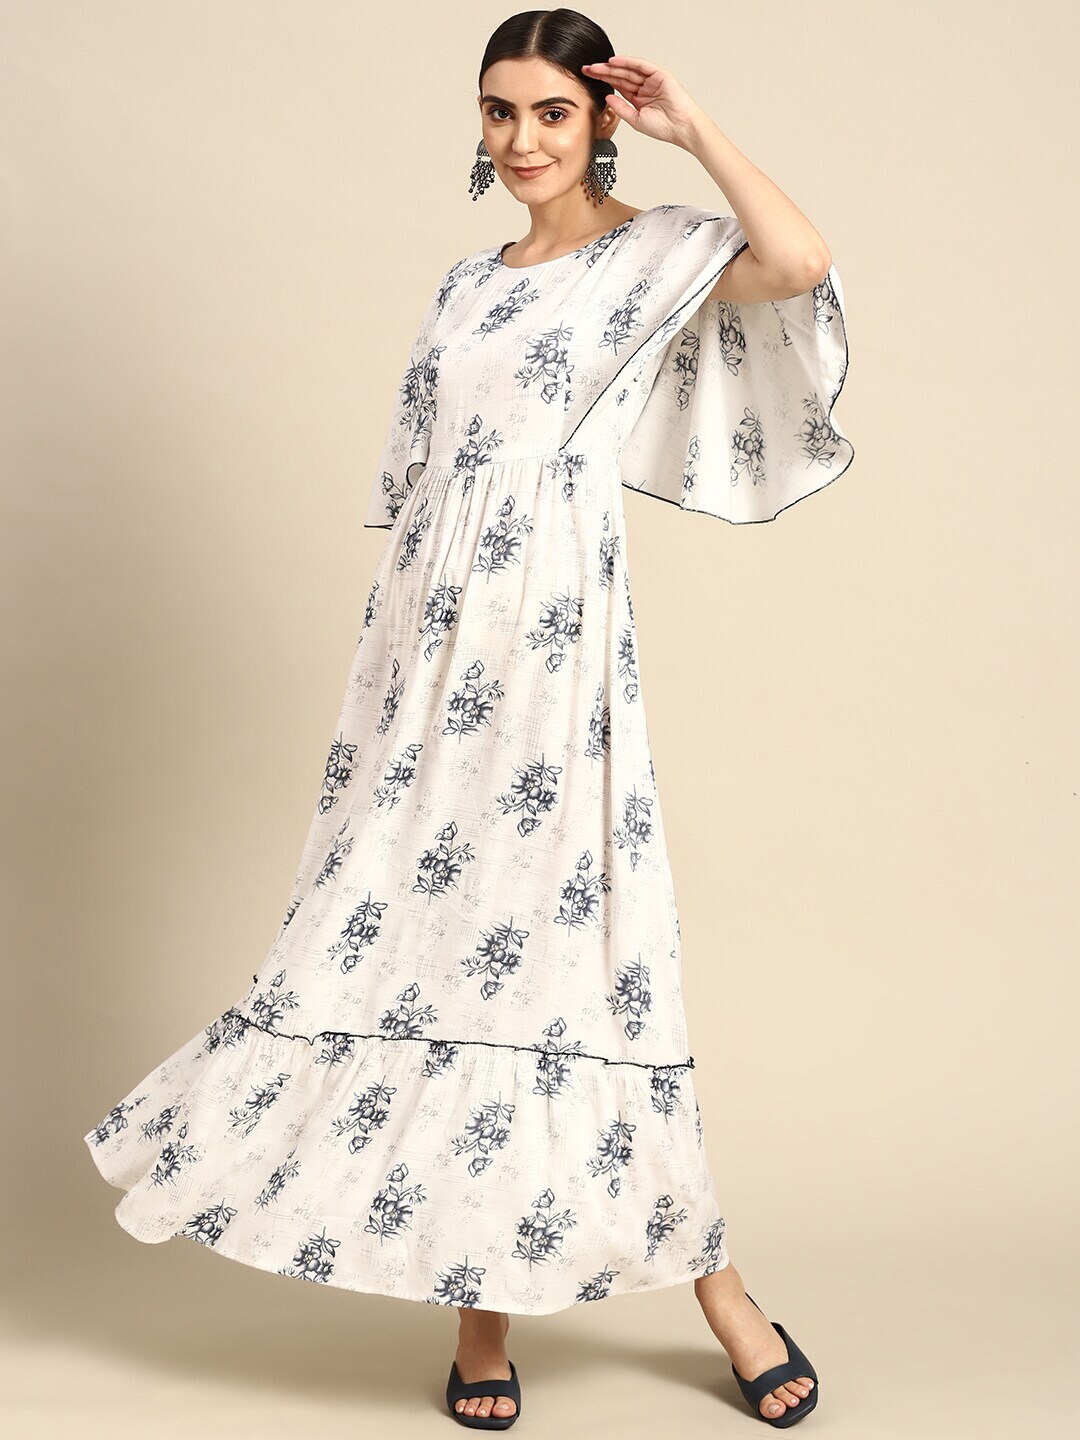 Nayo Off White & Grey Floral Ethnic A-Line Maxi Dress Price in India